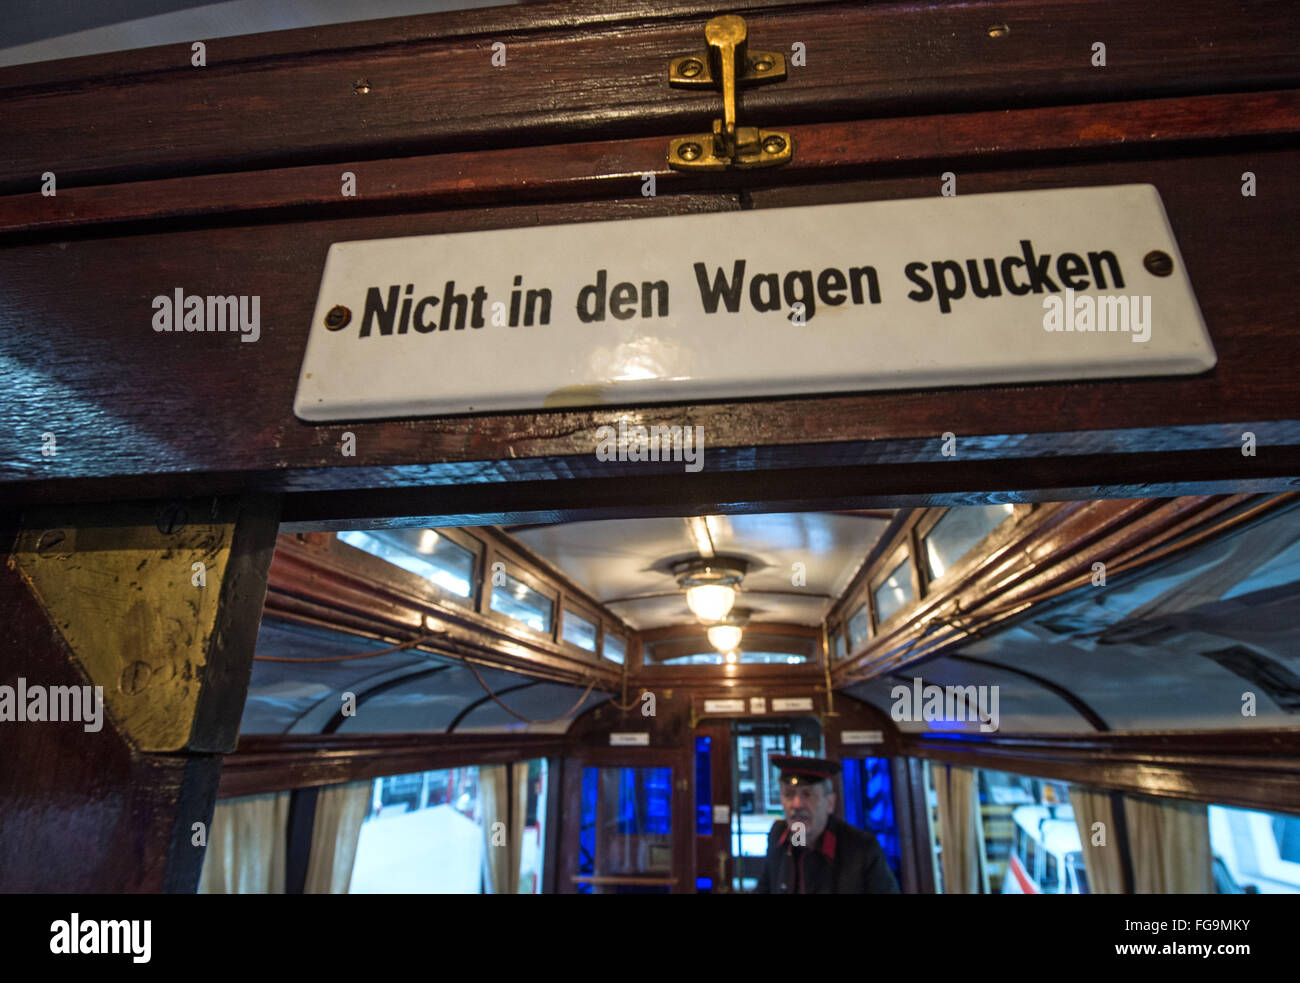 A sign reading 'Nicht in den Wagen spucken' (lit. 'Do not spit in the car') in the Merseburg overland railway from 1912 the tram museum in Halle, Germany, 18 February 2016. Halle is known as a pioneering city in the tram history with the first electrical tram network in Europe, having been erected in 1891. In the central station, the exhibition '125 Jahre elektrisiert durch Halle (Saale)' (lit. '125 years electrified through Halle') is opening tonight. PHOTO: HENDRICK SCHMIDT/dpa Stock Photo